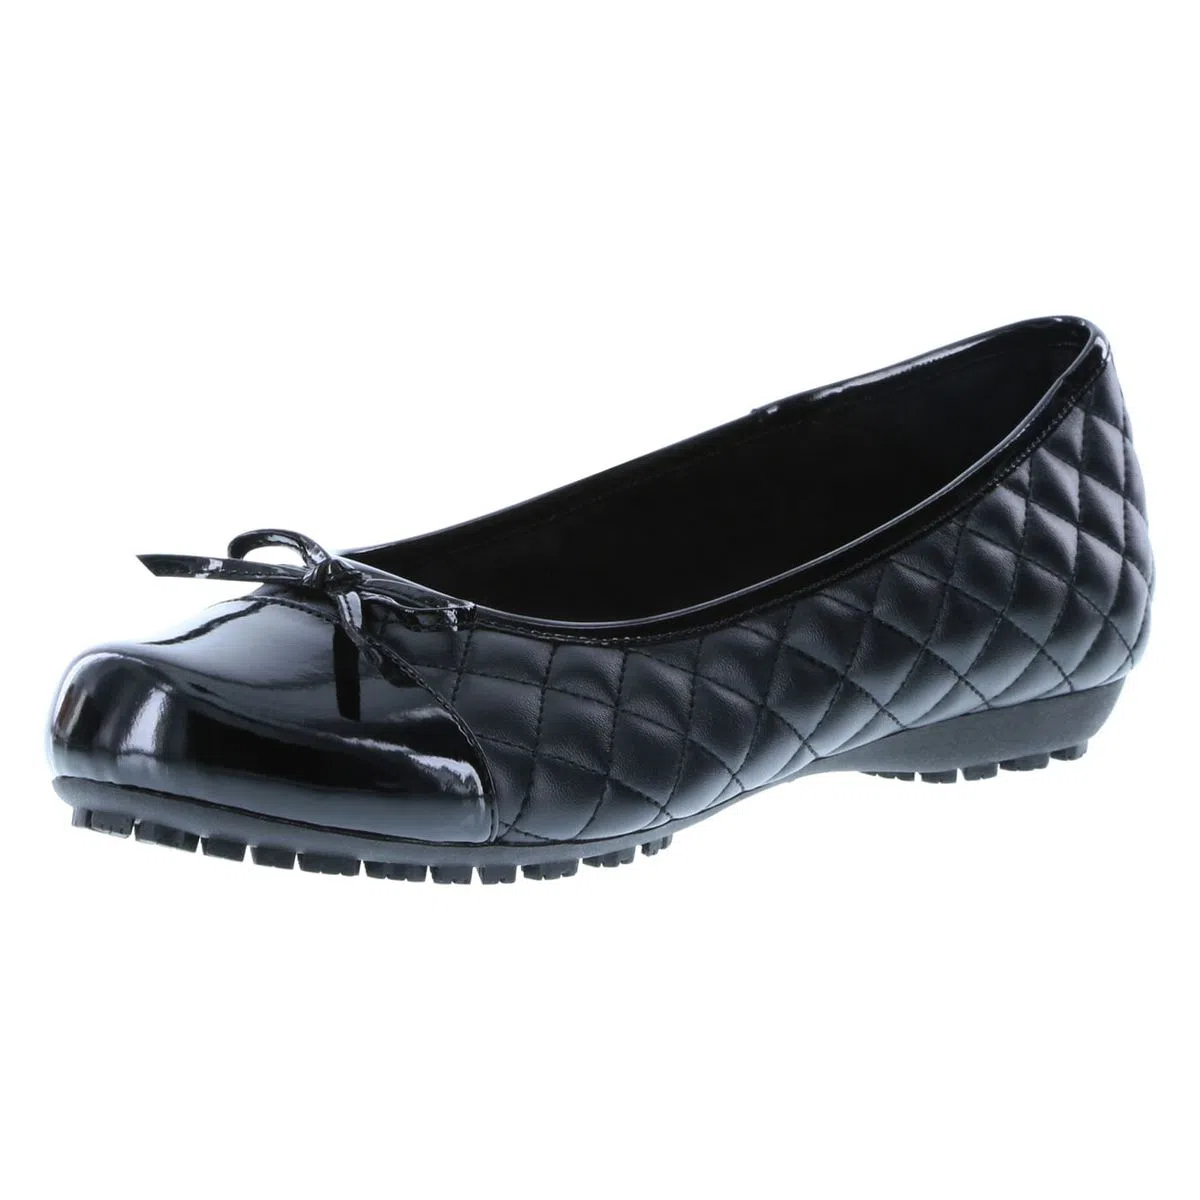 Safety First: Women's Shoes for Work - Payless Shoes Blog